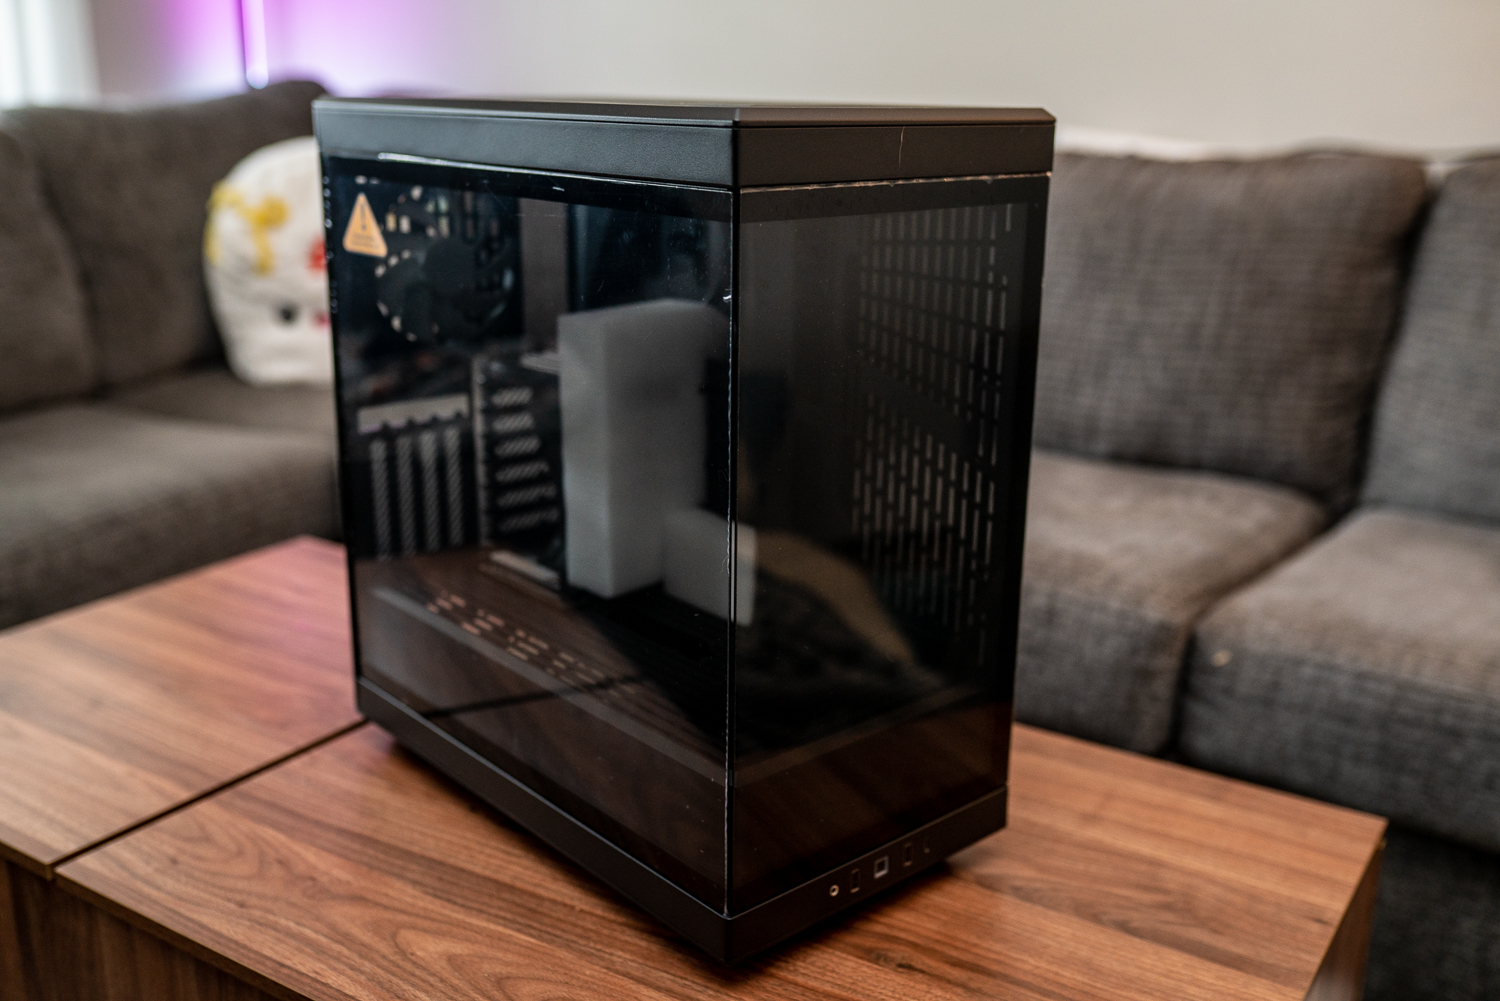 The HYTE Y40 Mid Tower PC Case Review You NEED to Watch Before